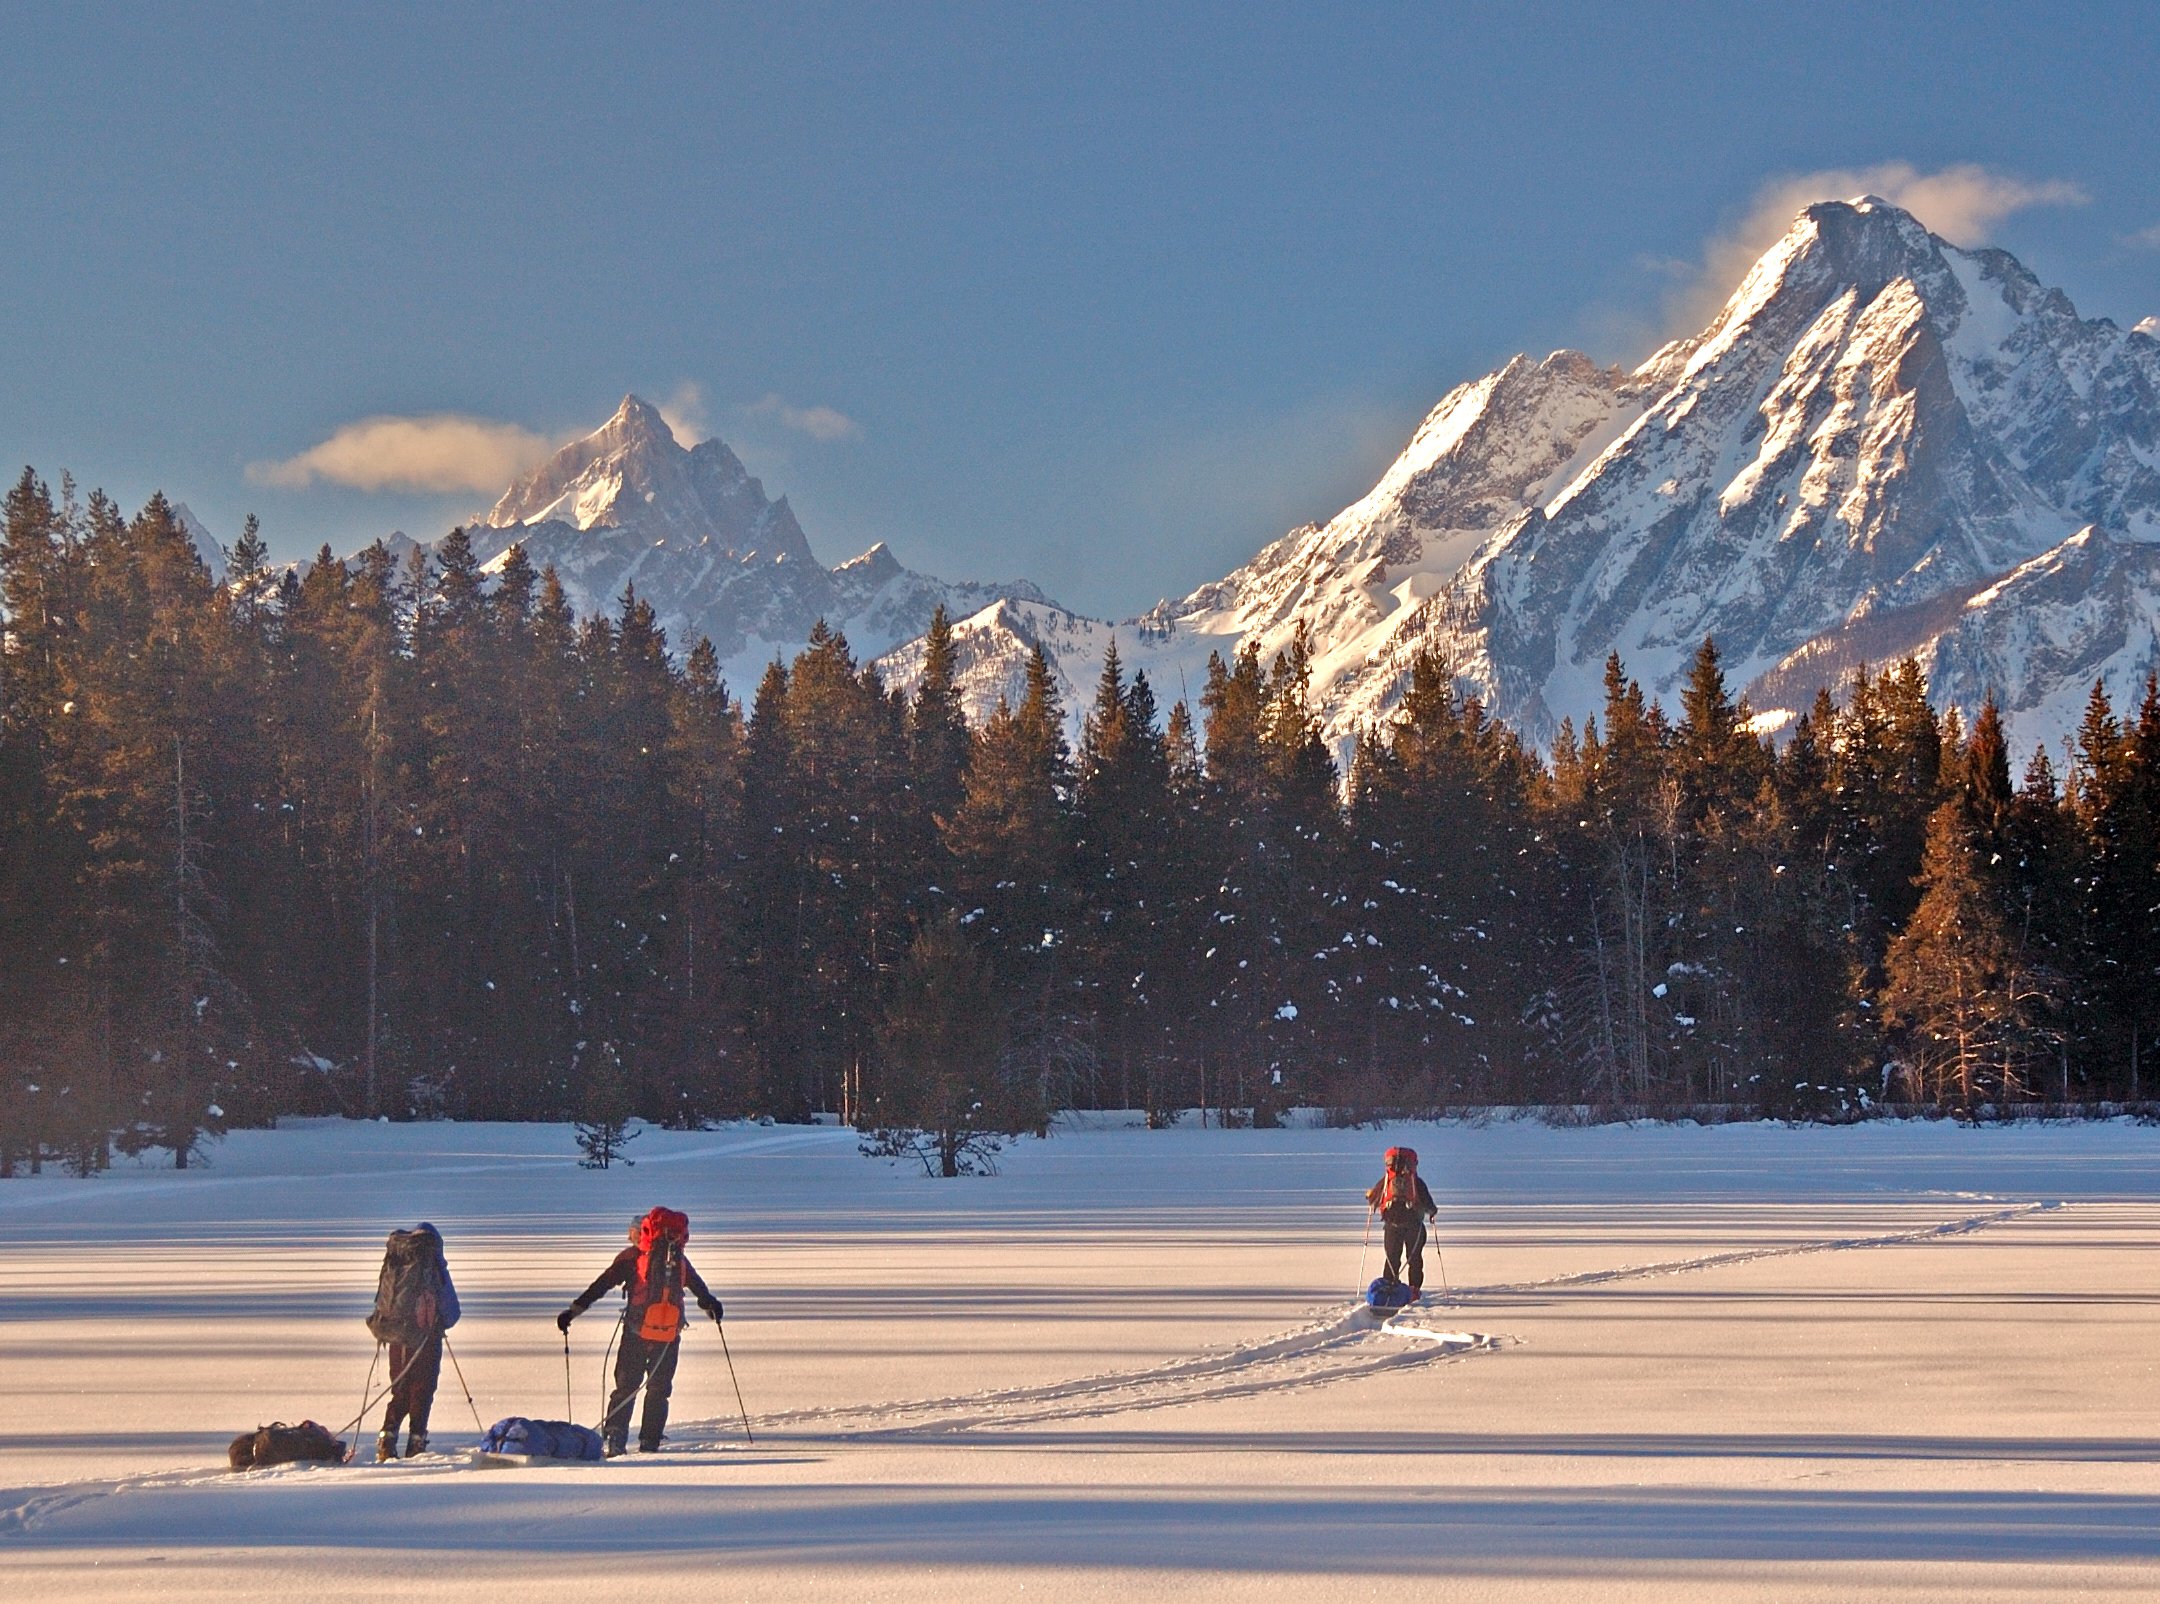 NOLS students skiing and splitboarding in the Teton Valley.